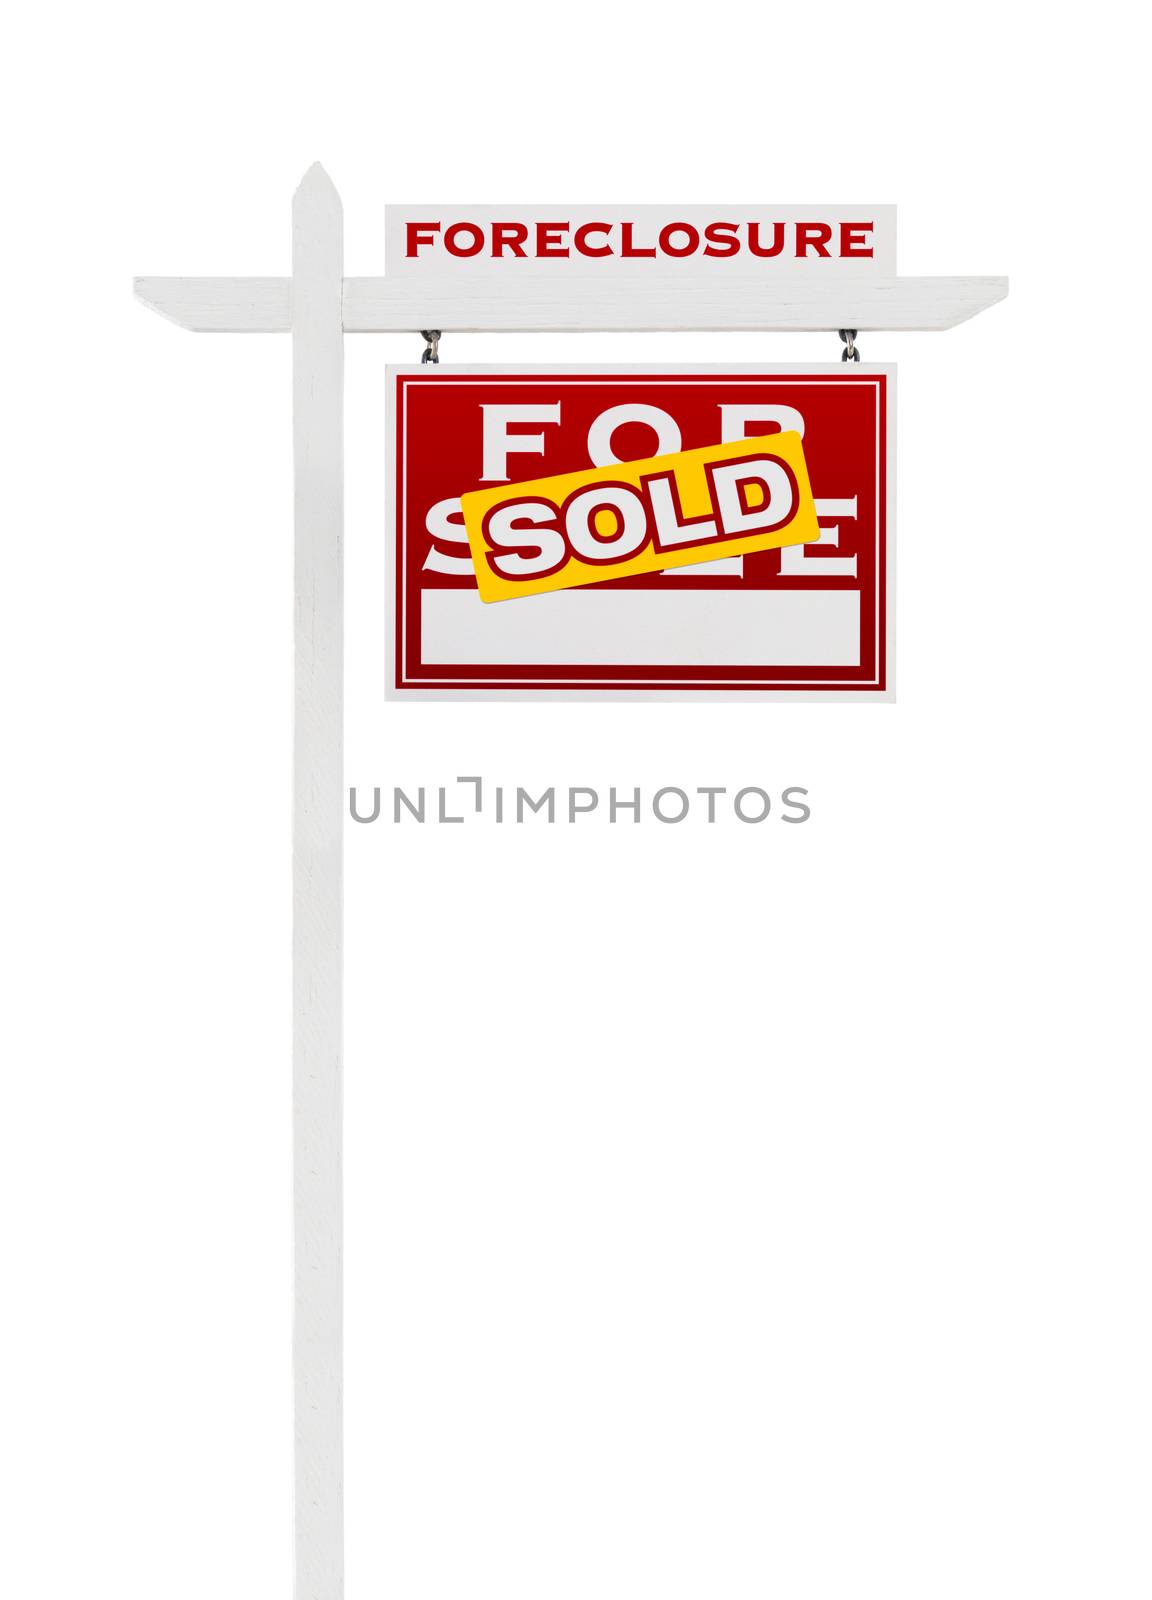 Right Facing Foreclosure Sold For Sale Real Estate Sign Isolated by Feverpitched